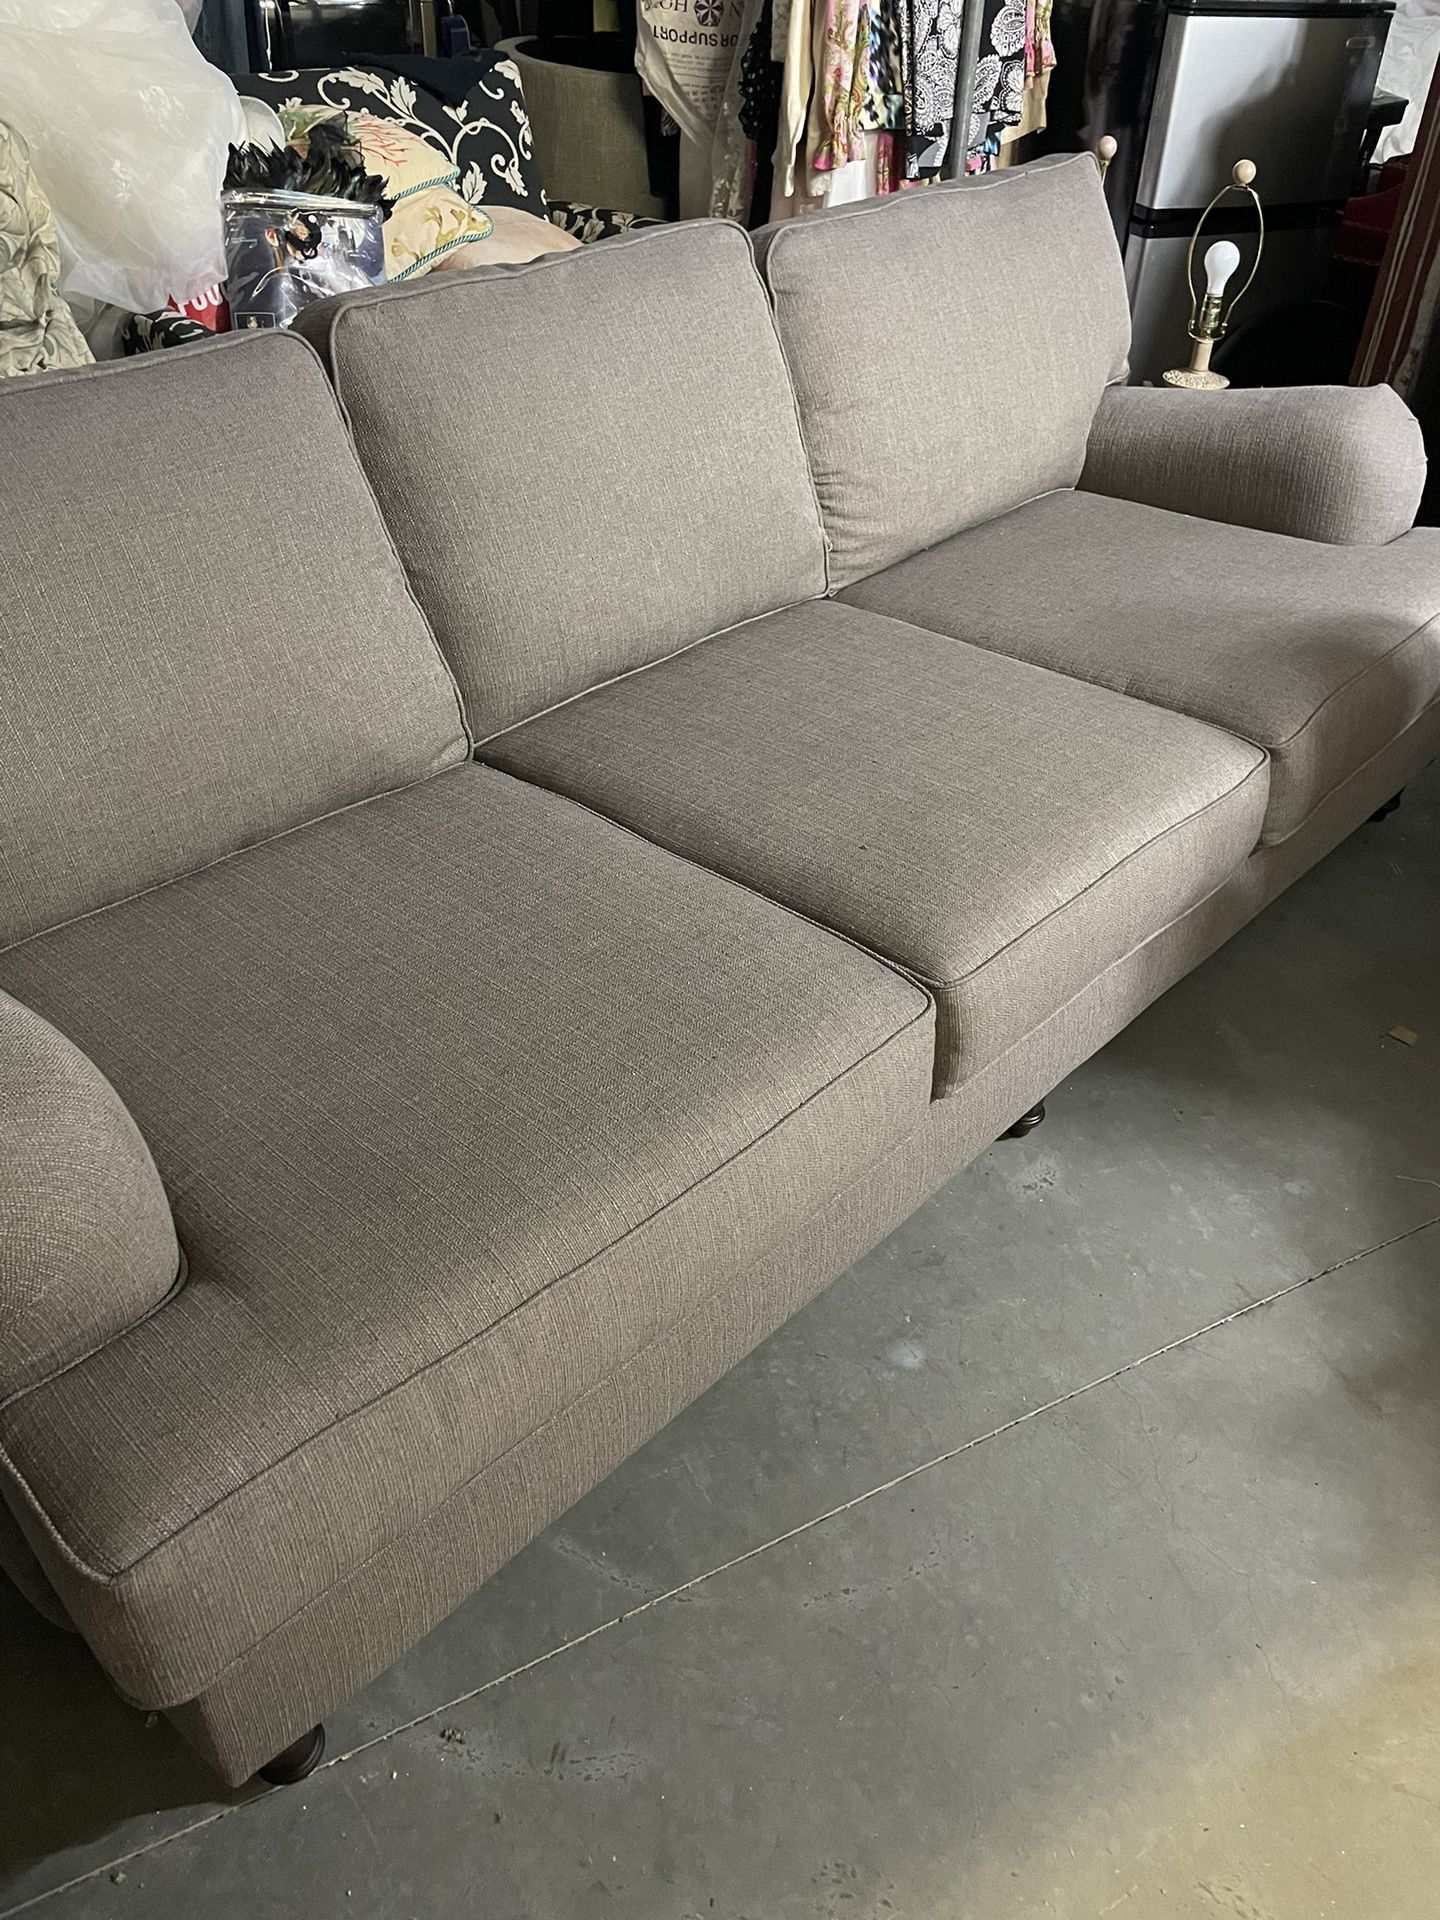 Kroehler Sofa/ Couch , (Extra Long)Grey, Top Of The Line If Furniture, Kroehler